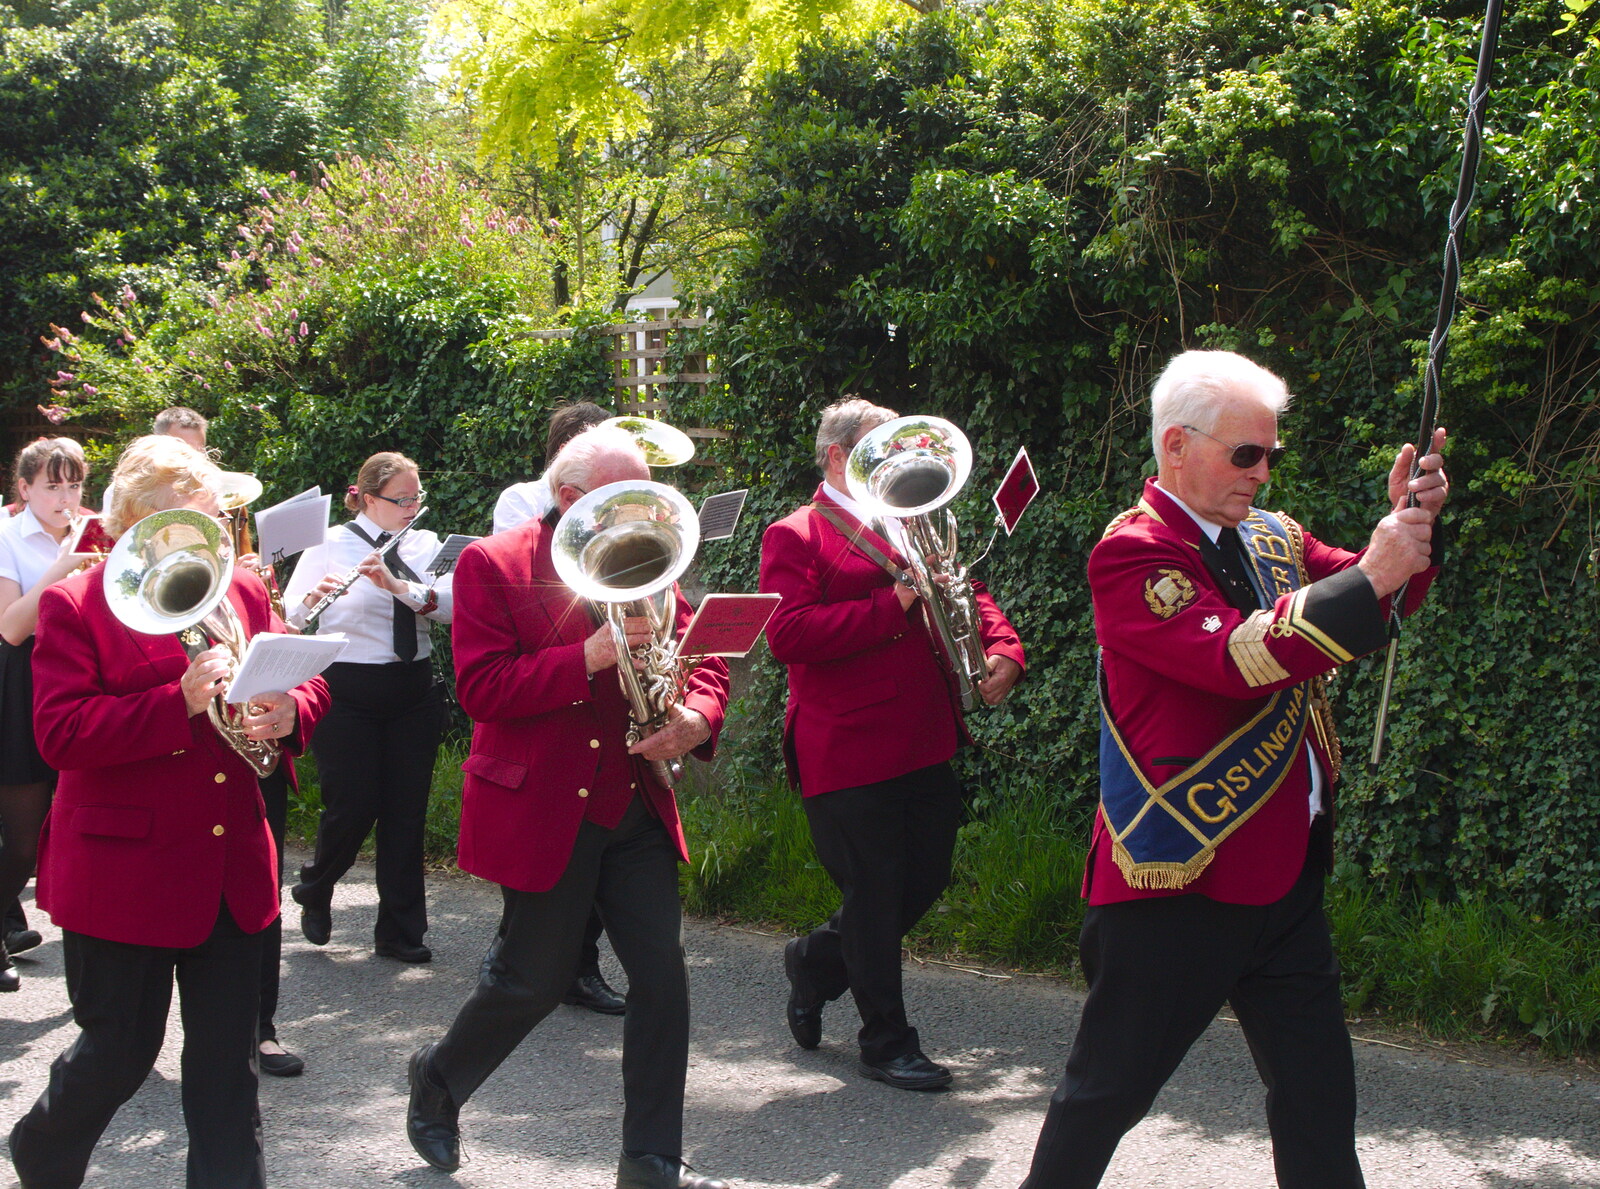 Terry leads the band from The BSCC at North Lopham, and the GSB Mayor's Parade, Eye, Suffolk - 23rd June 2019